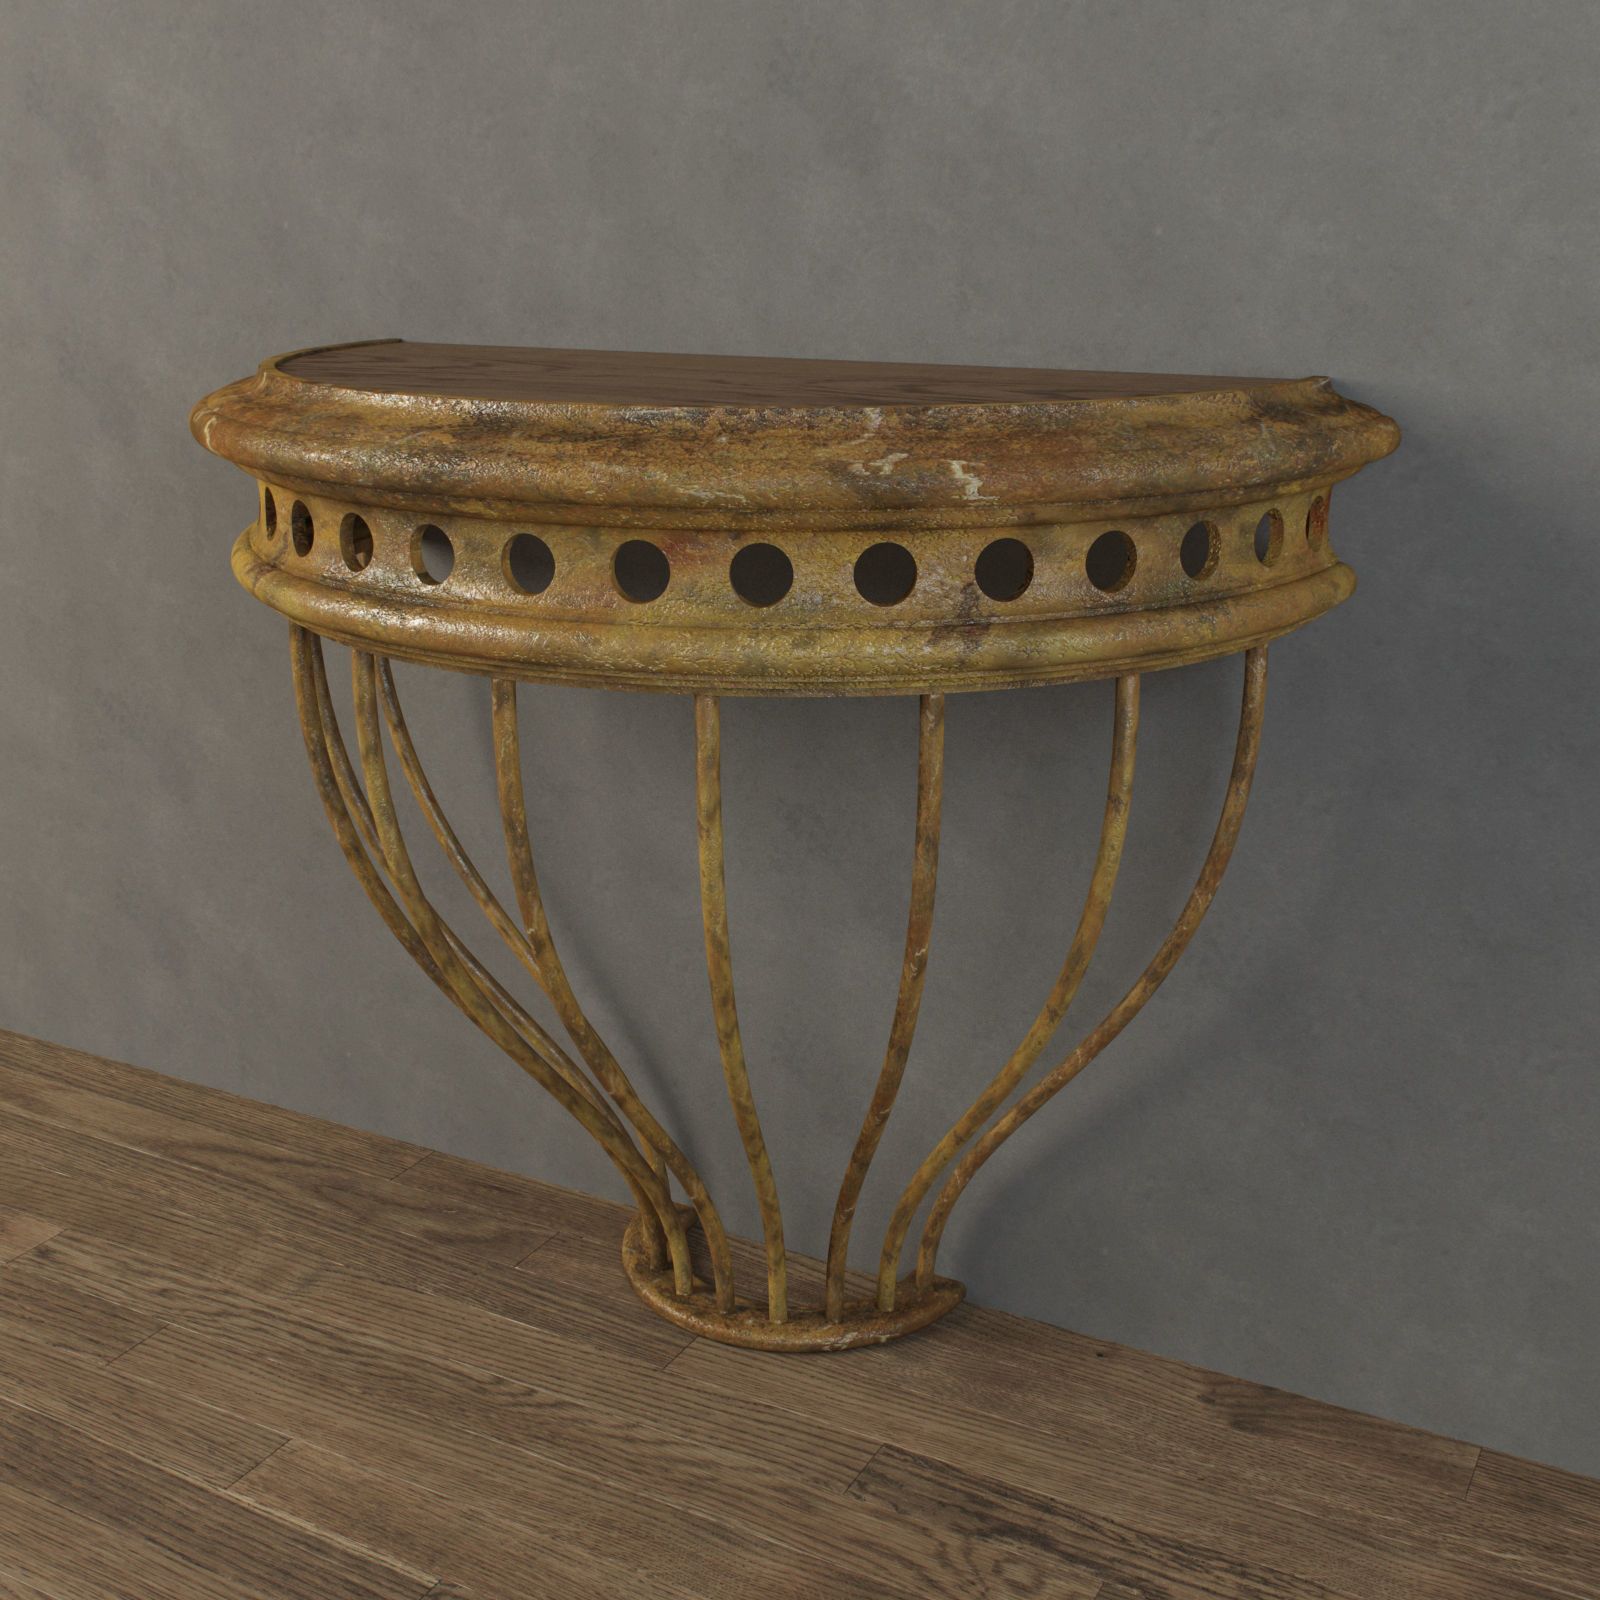 Restoration Hardware – Cast Iron Demilune Console Table 3d Model | Cgtrader With Regard To Round Iron Console Tables (View 6 of 20)